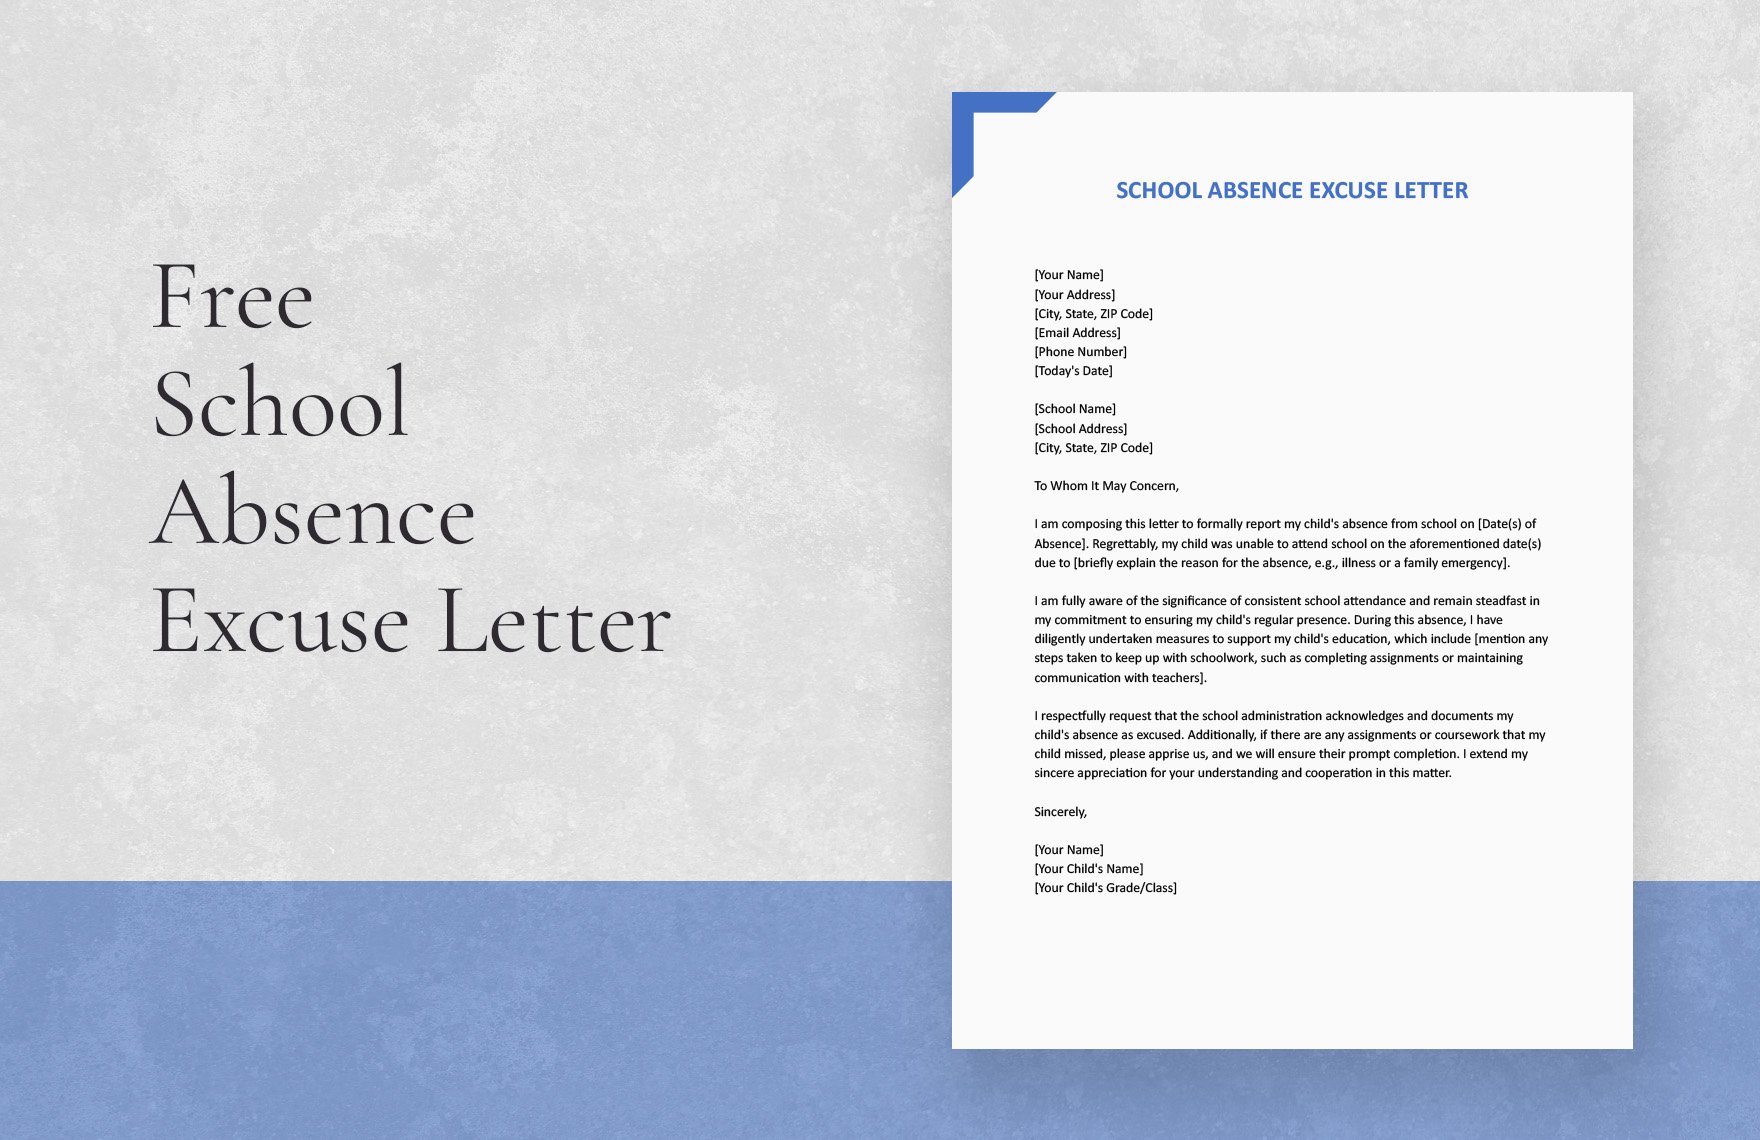 School Absence Excuse Letter